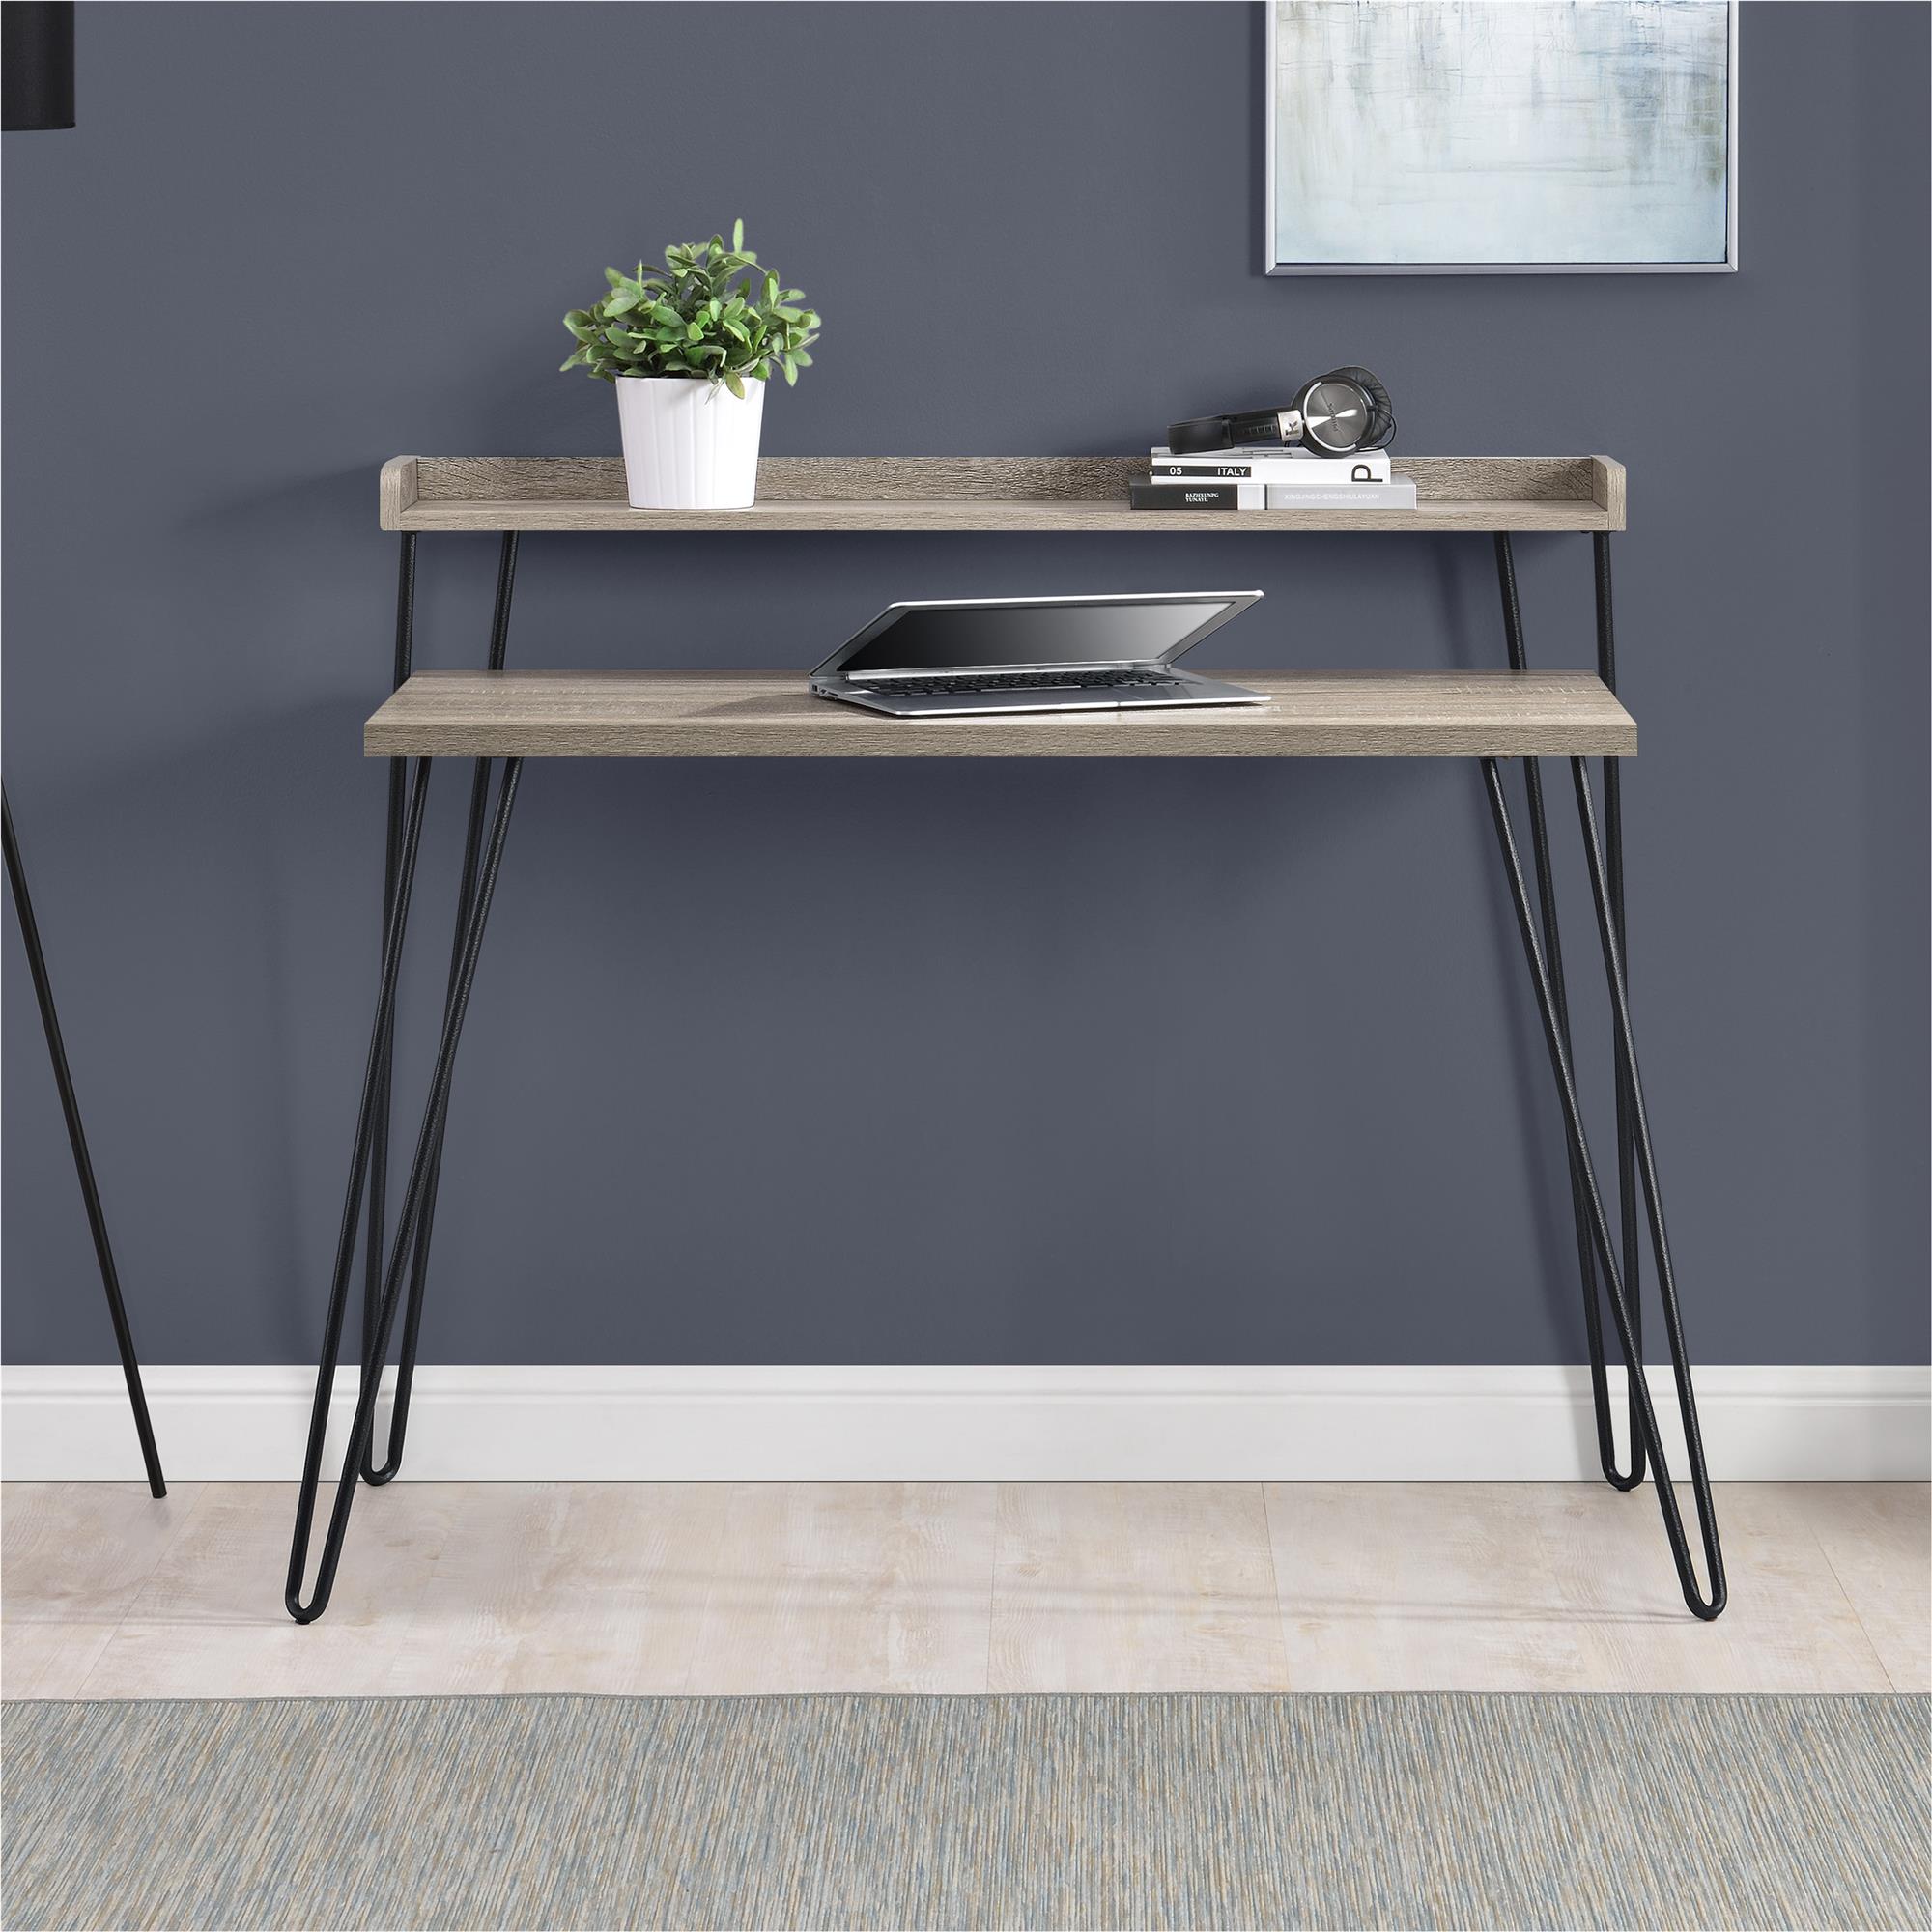 Mainstays Griffin Retro Computer Desk with Riser, Distressed Gray Oak - image 1 of 8